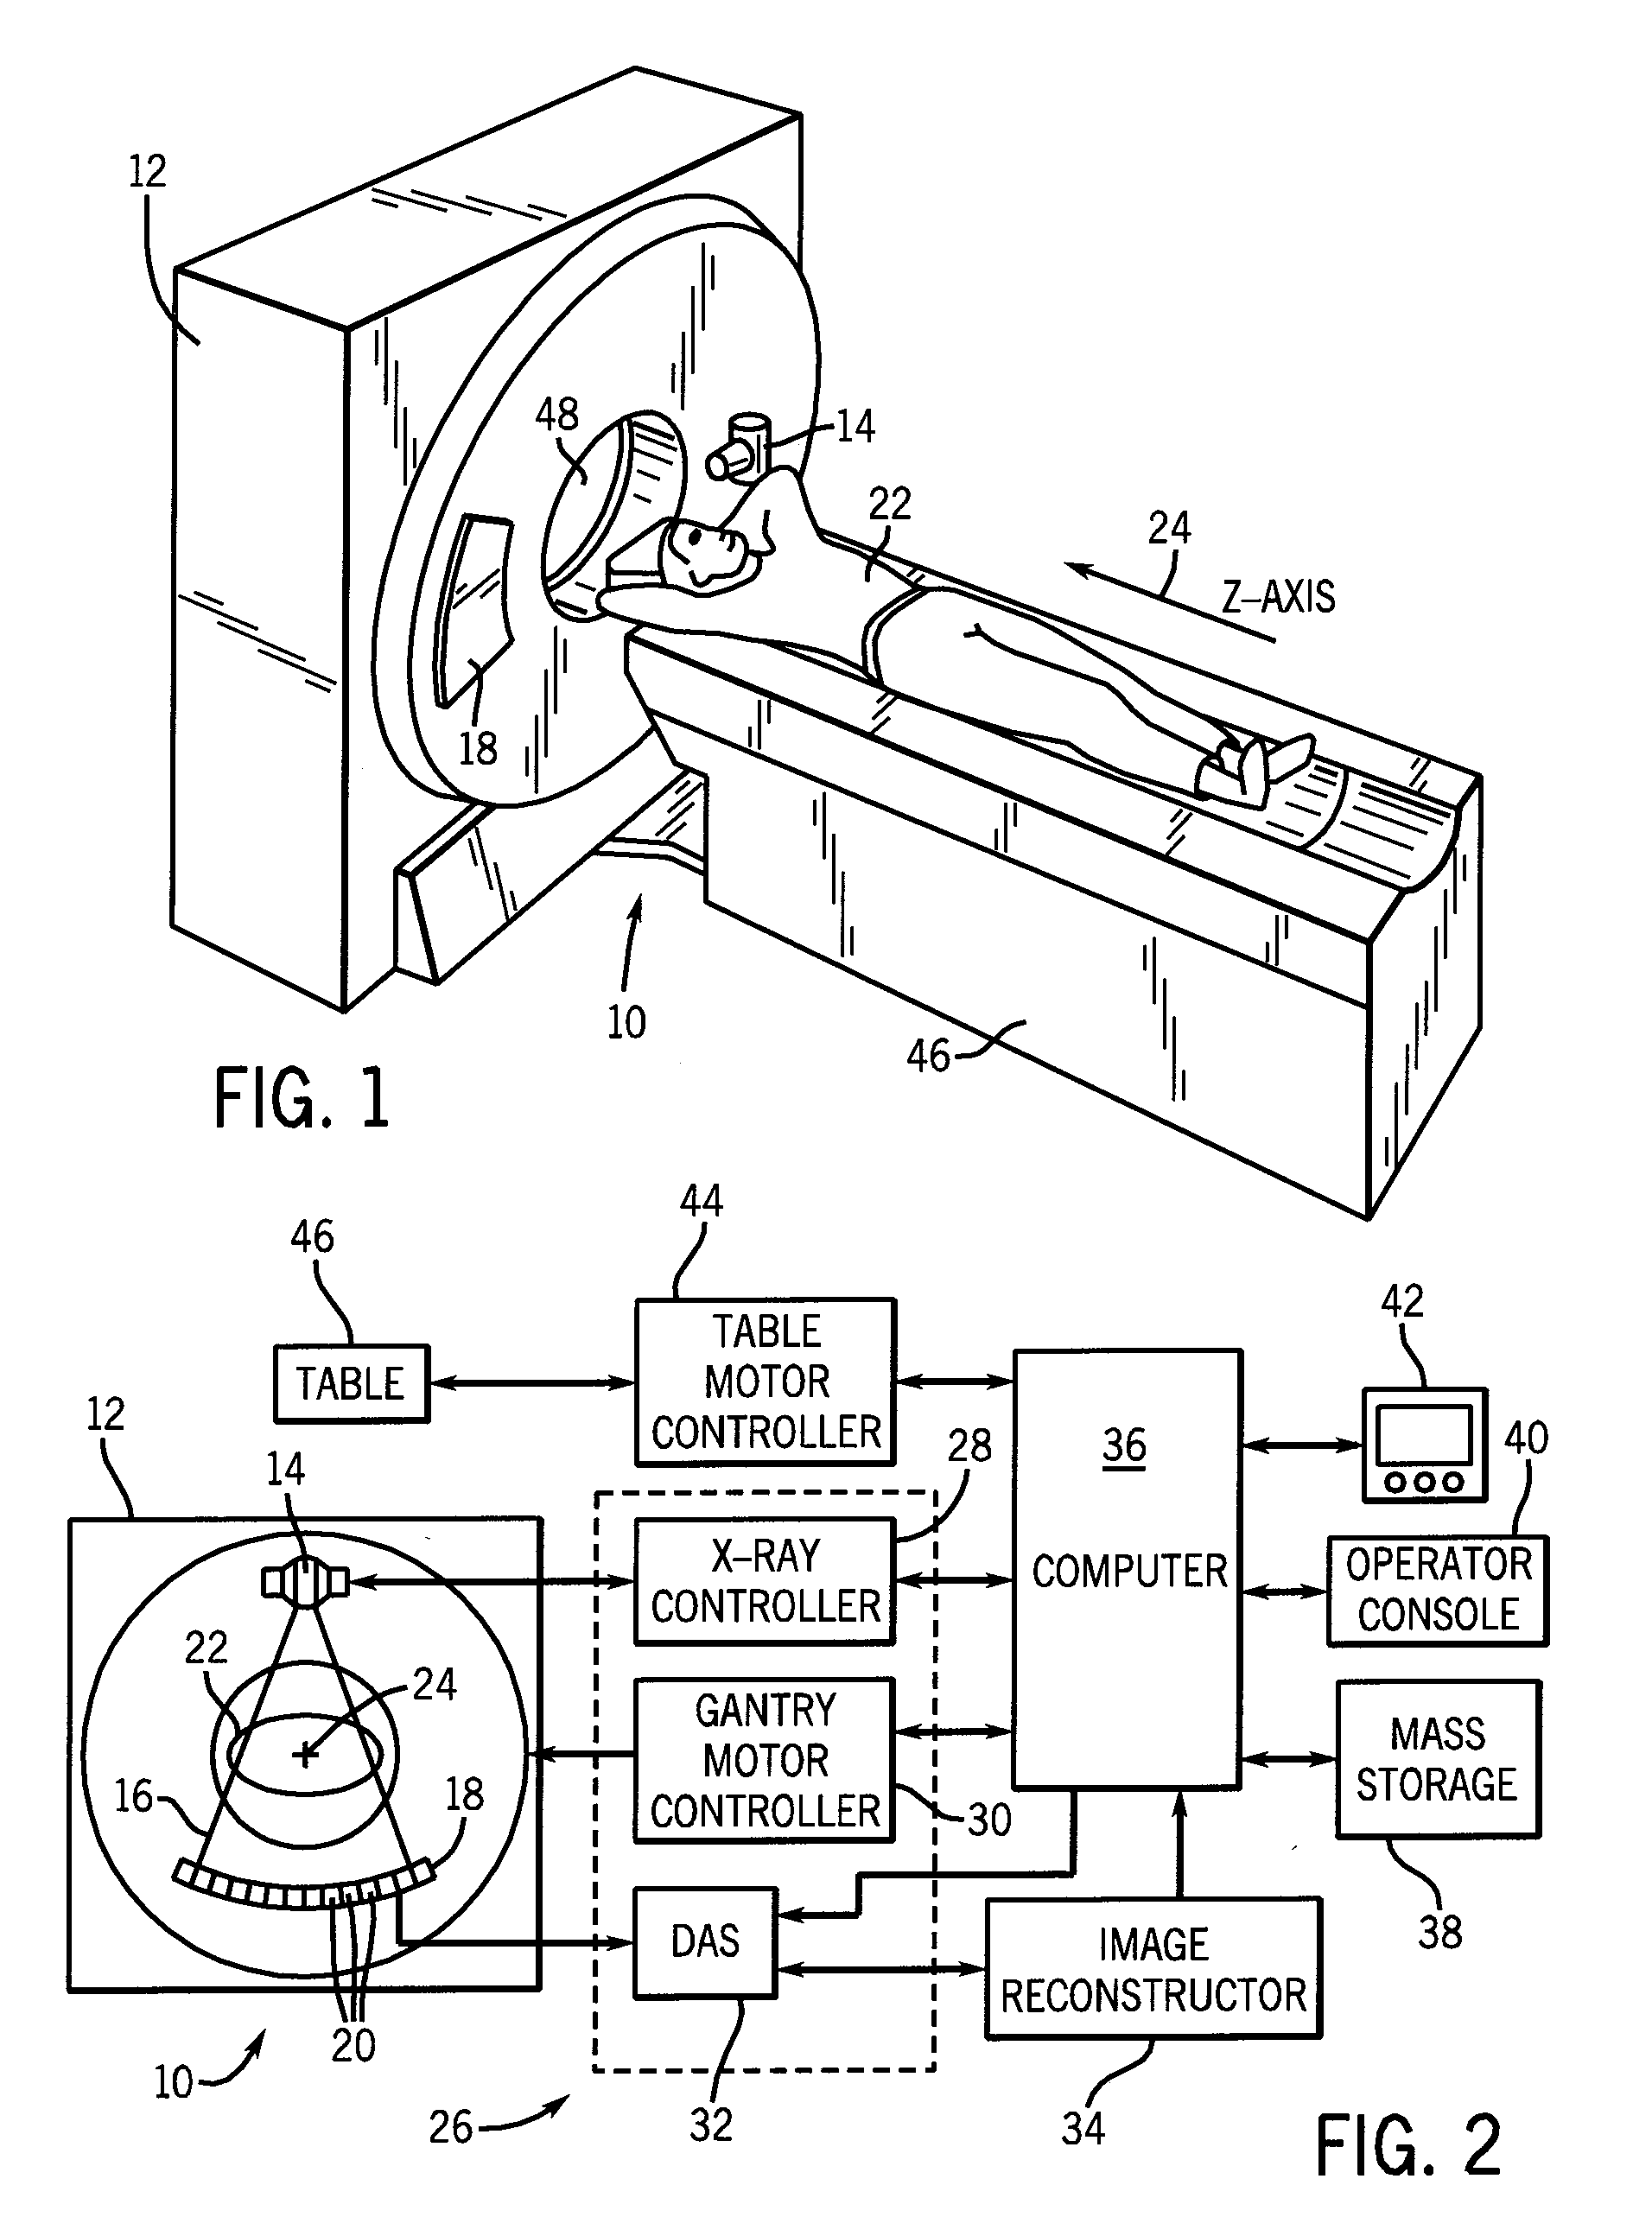 Method and apparatus for reduction of metal artifacts in ct imaging